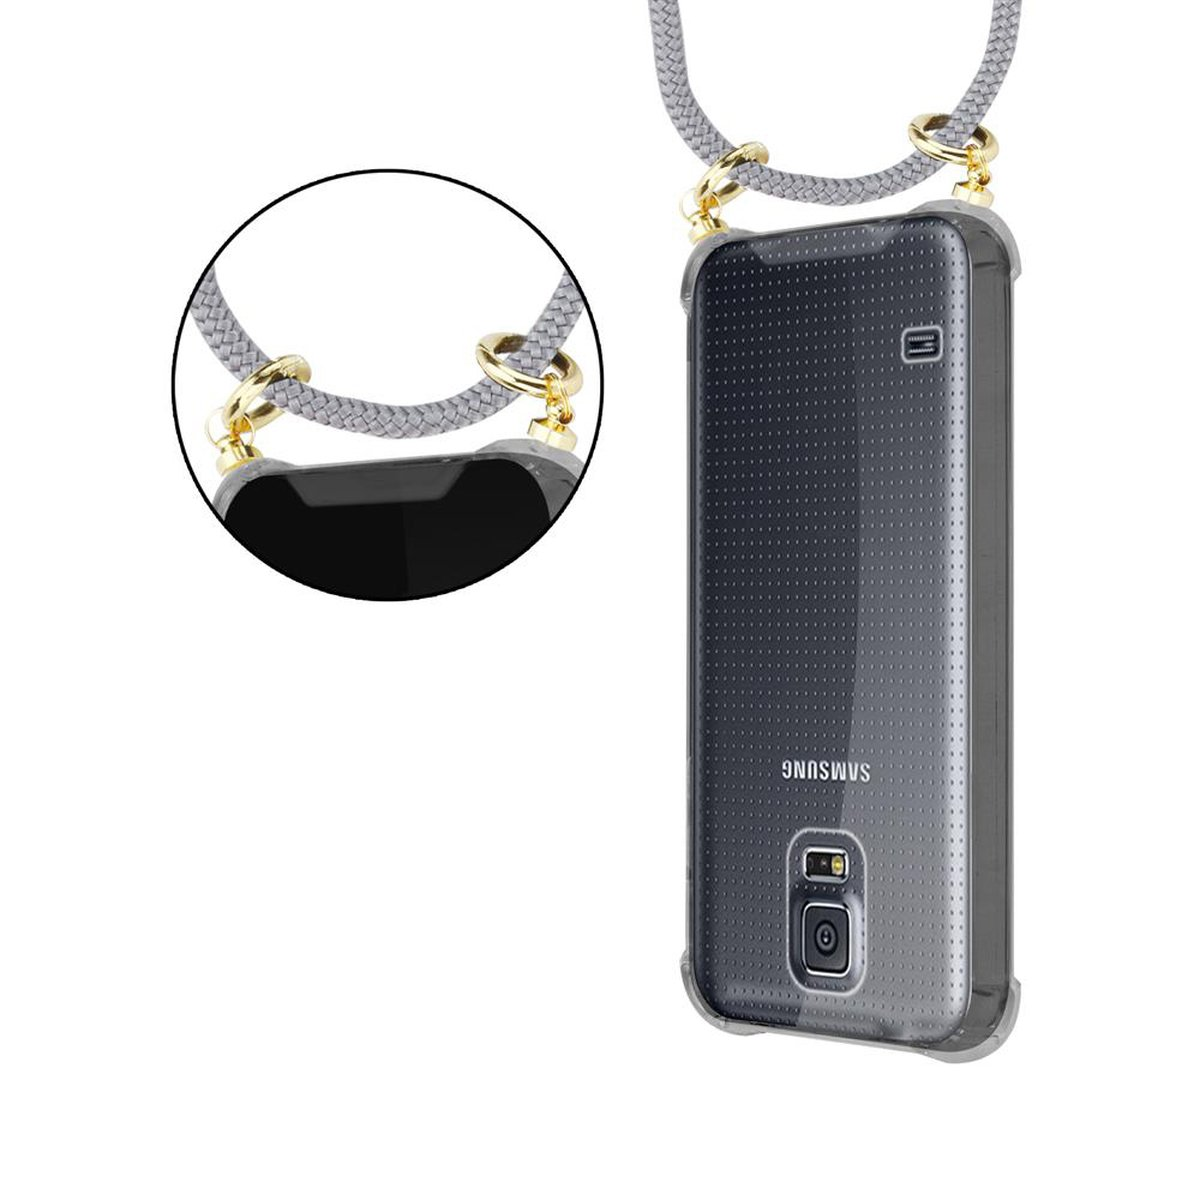 Ringen, NEO, / Handy Hülle, S5 und Backcover, mit Band Kordel Samsung, Kette S5 GRAU abnehmbarer Galaxy Gold SILBER CADORABO